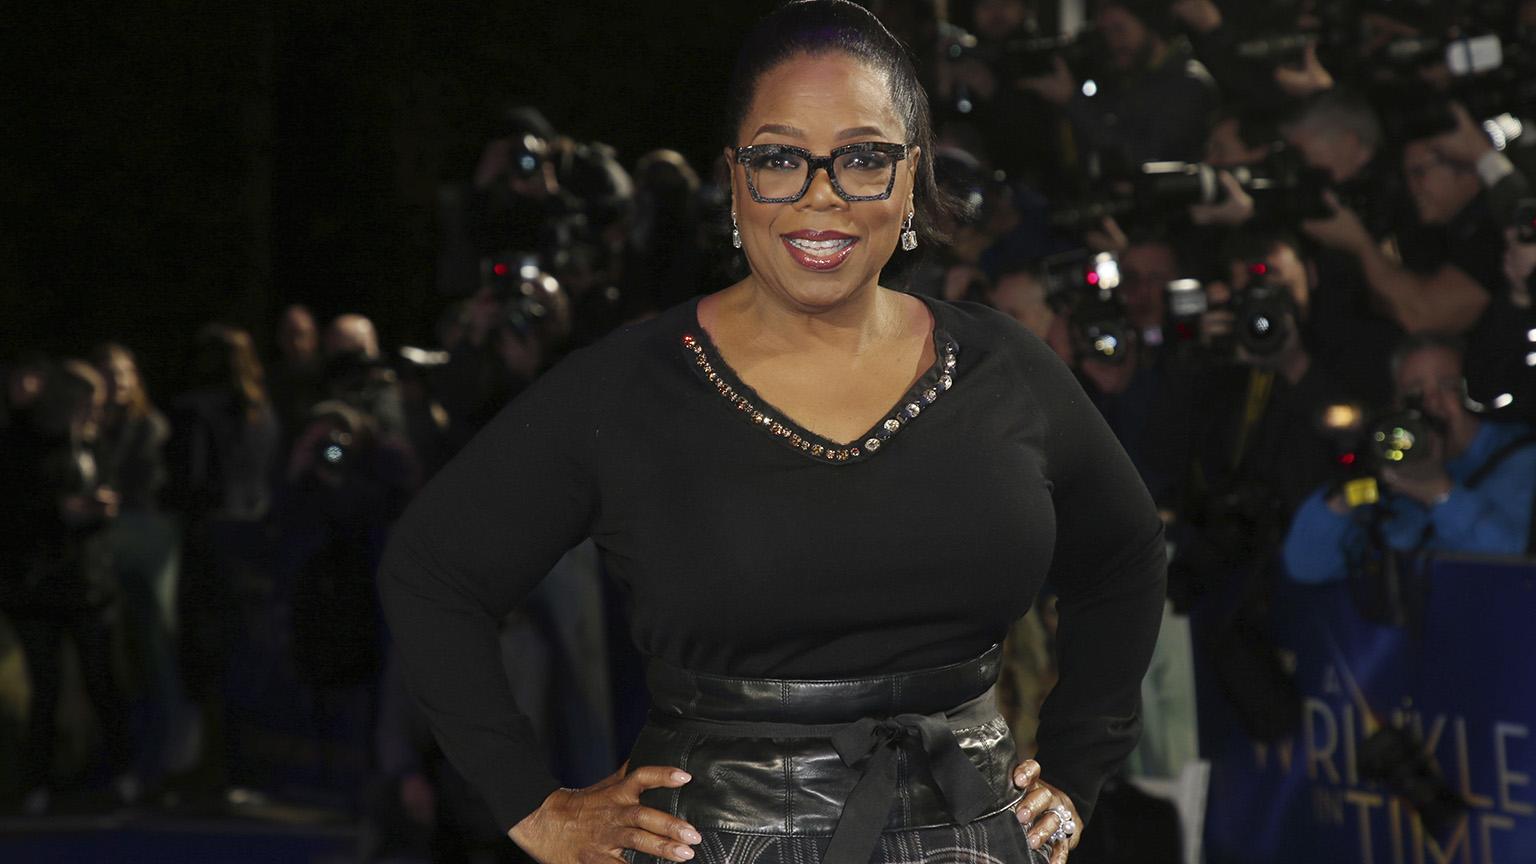 In this March 13, 2018, file photo, actress Oprah Winfrey poses for photographers upon arrival at the premiere of the film “A Wrinkle In Time” in London. (Photo by Joel C Ryan / Invision / AP File Photo)